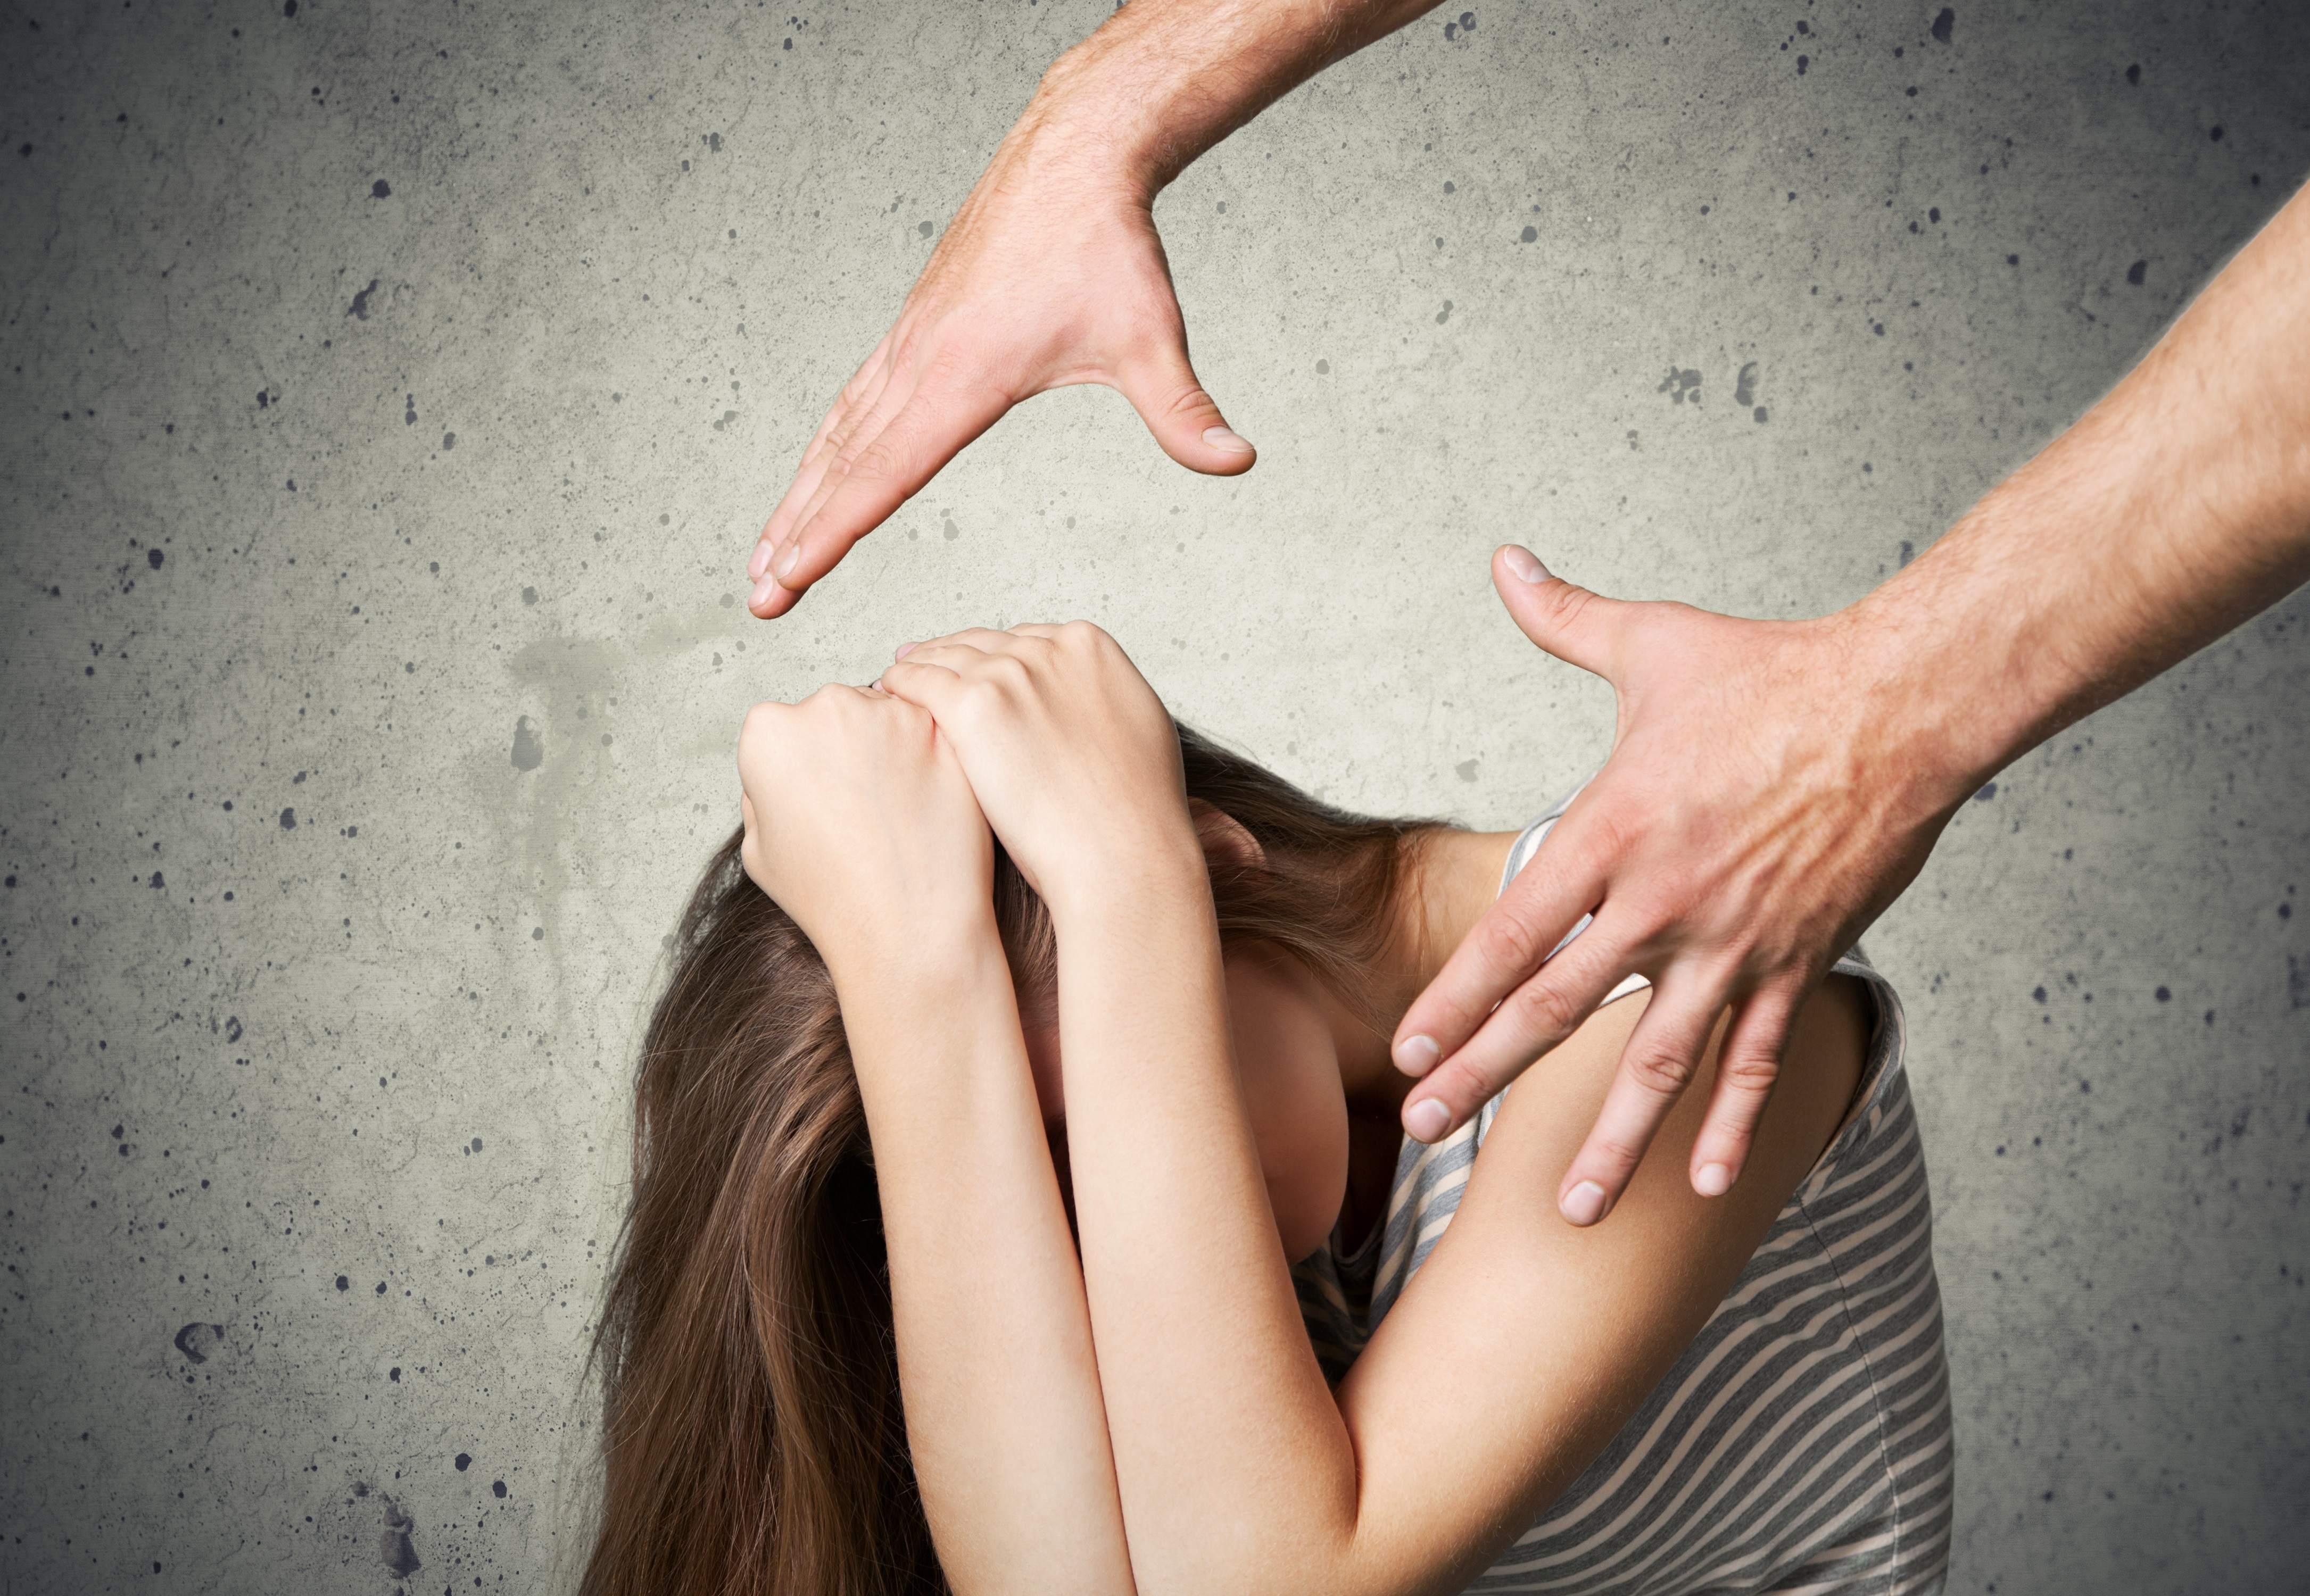 Important Things to Know About Domestic Violence Cases